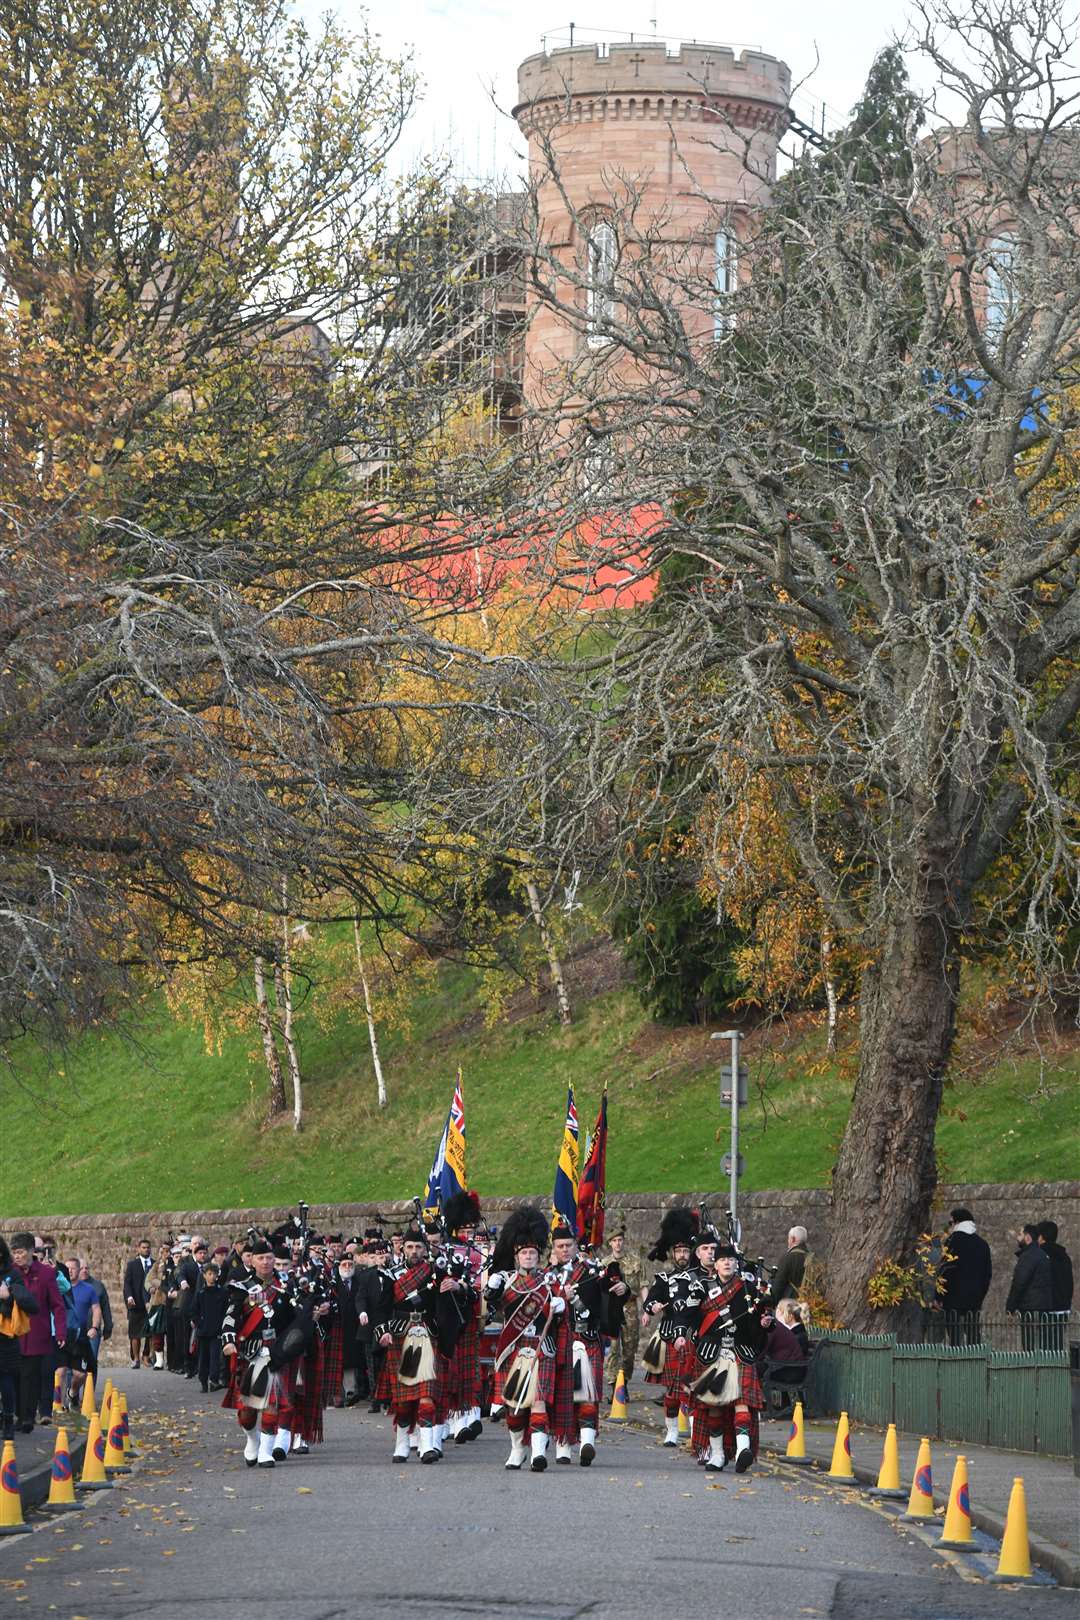 The parade marches below Inverness Castle.